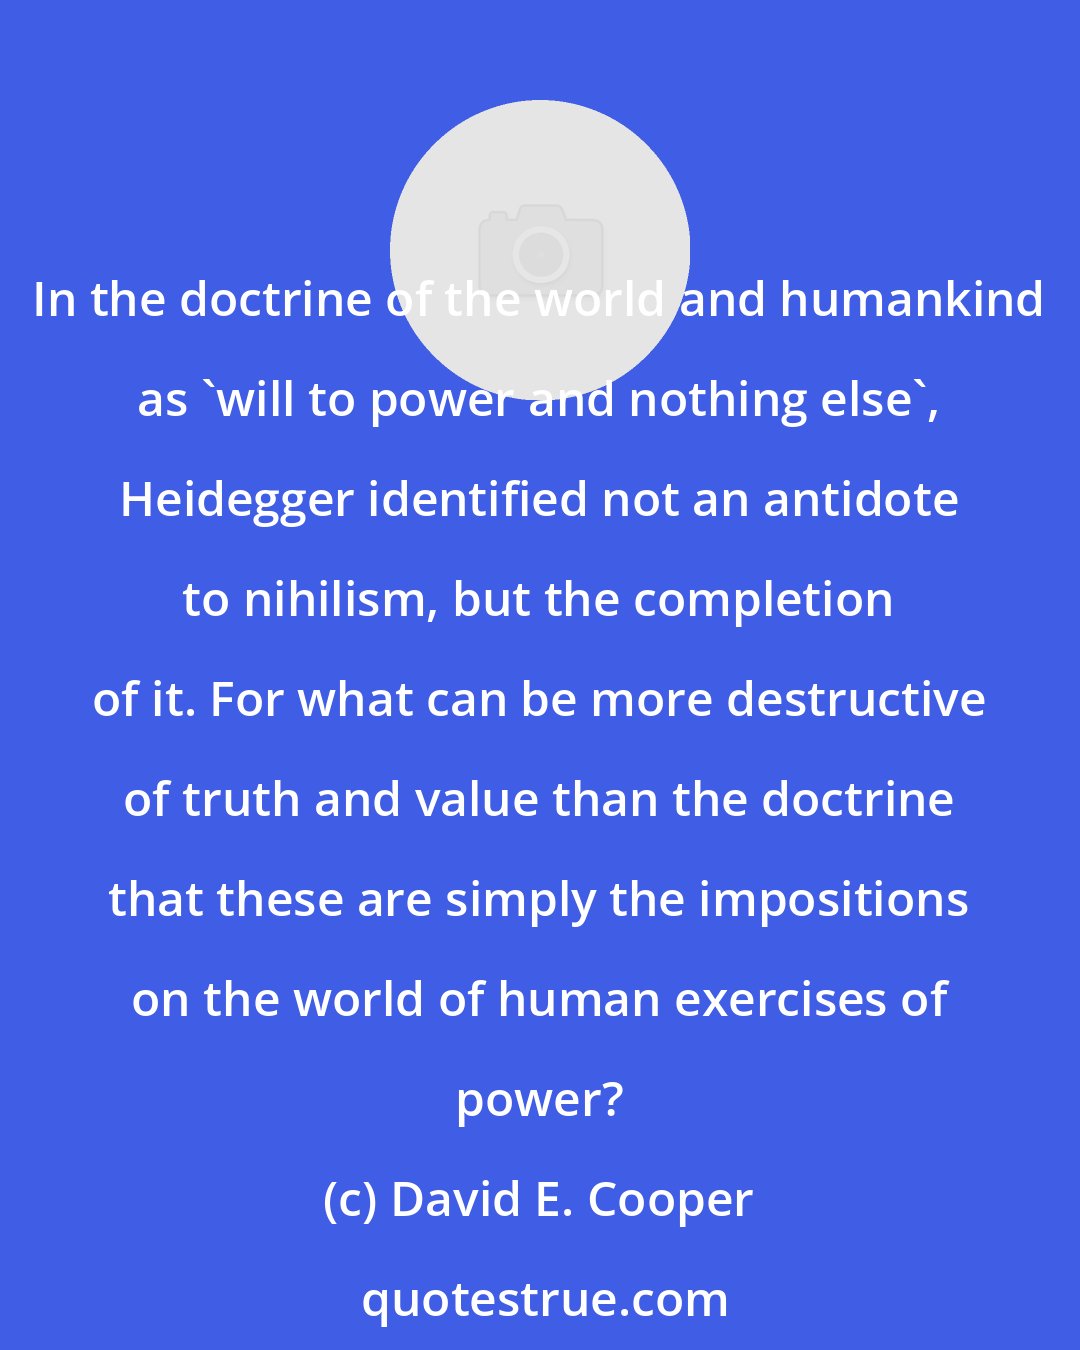 David E. Cooper: In the doctrine of the world and humankind as 'will to power and nothing else', Heidegger identified not an antidote to nihilism, but the completion of it. For what can be more destructive of truth and value than the doctrine that these are simply the impositions on the world of human exercises of power?